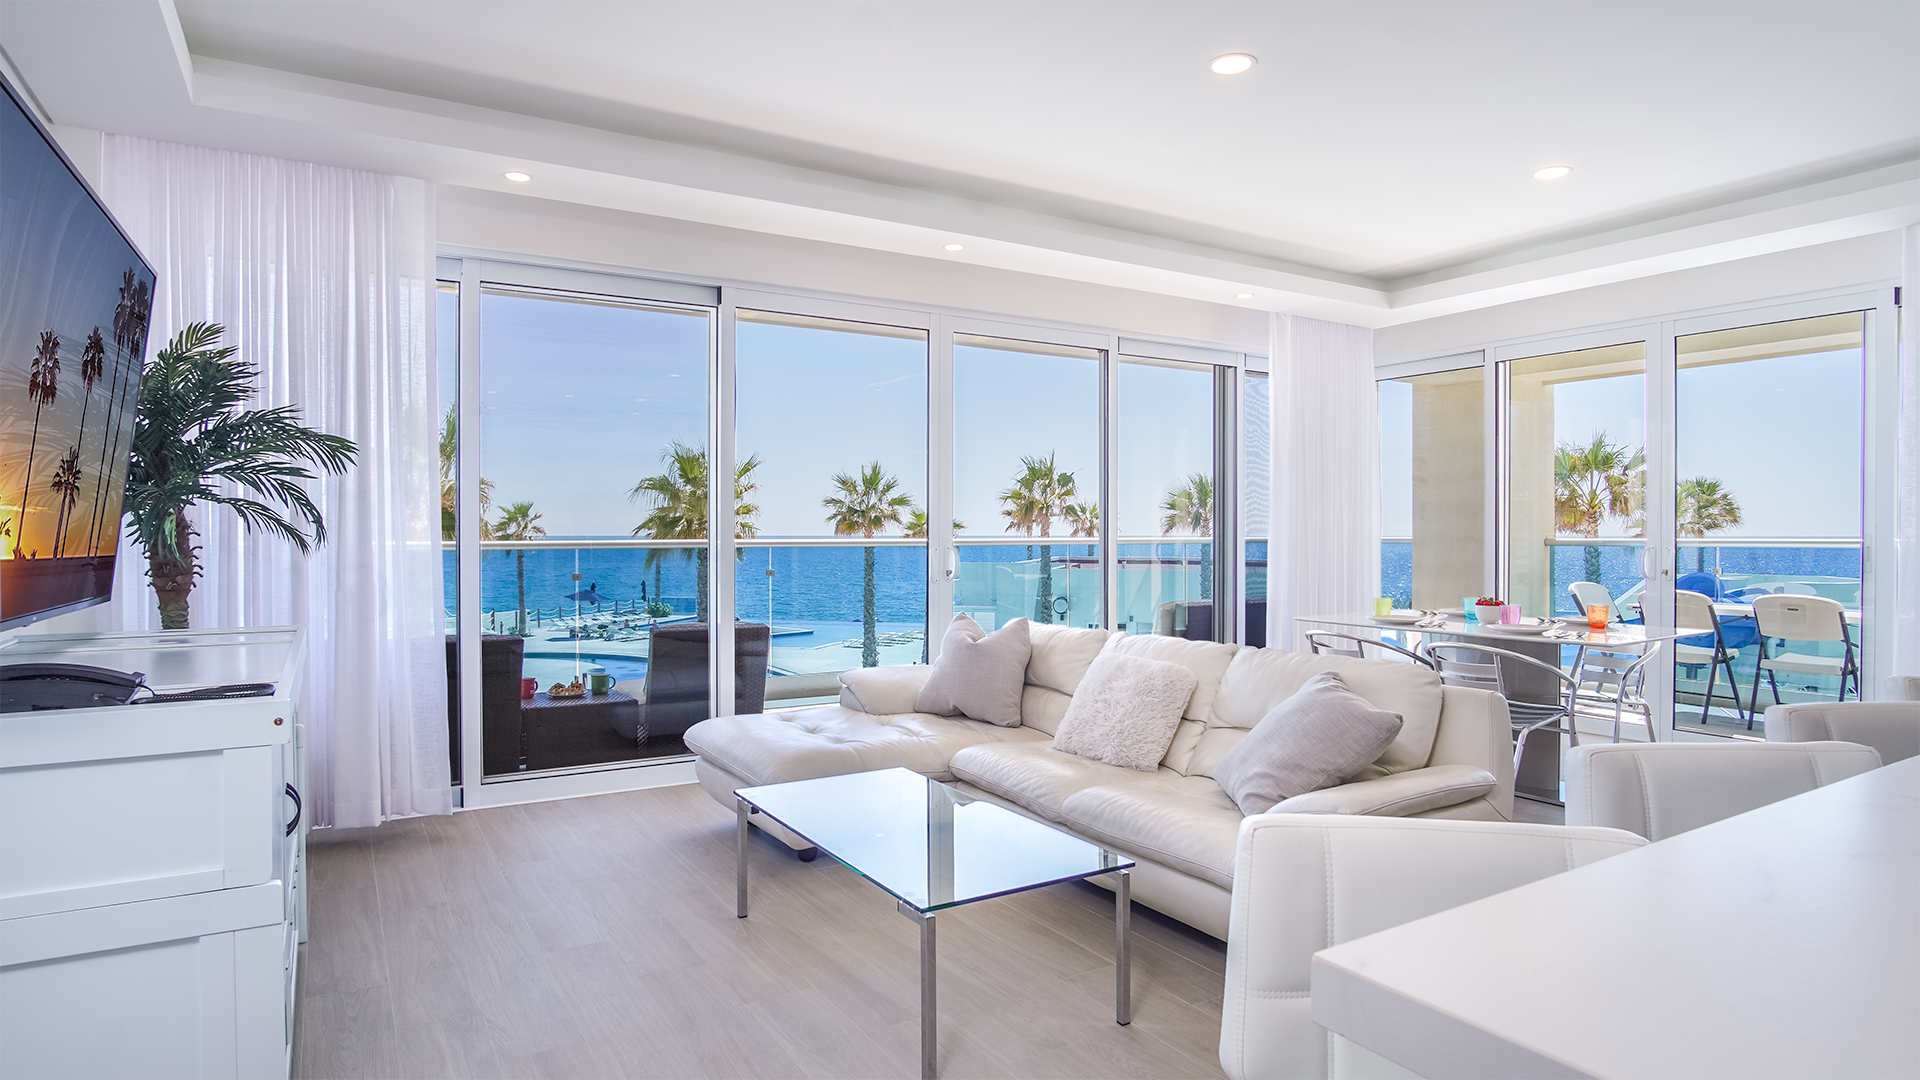 Imagine days spent along the beach in this magnificent two bedroom condominium!